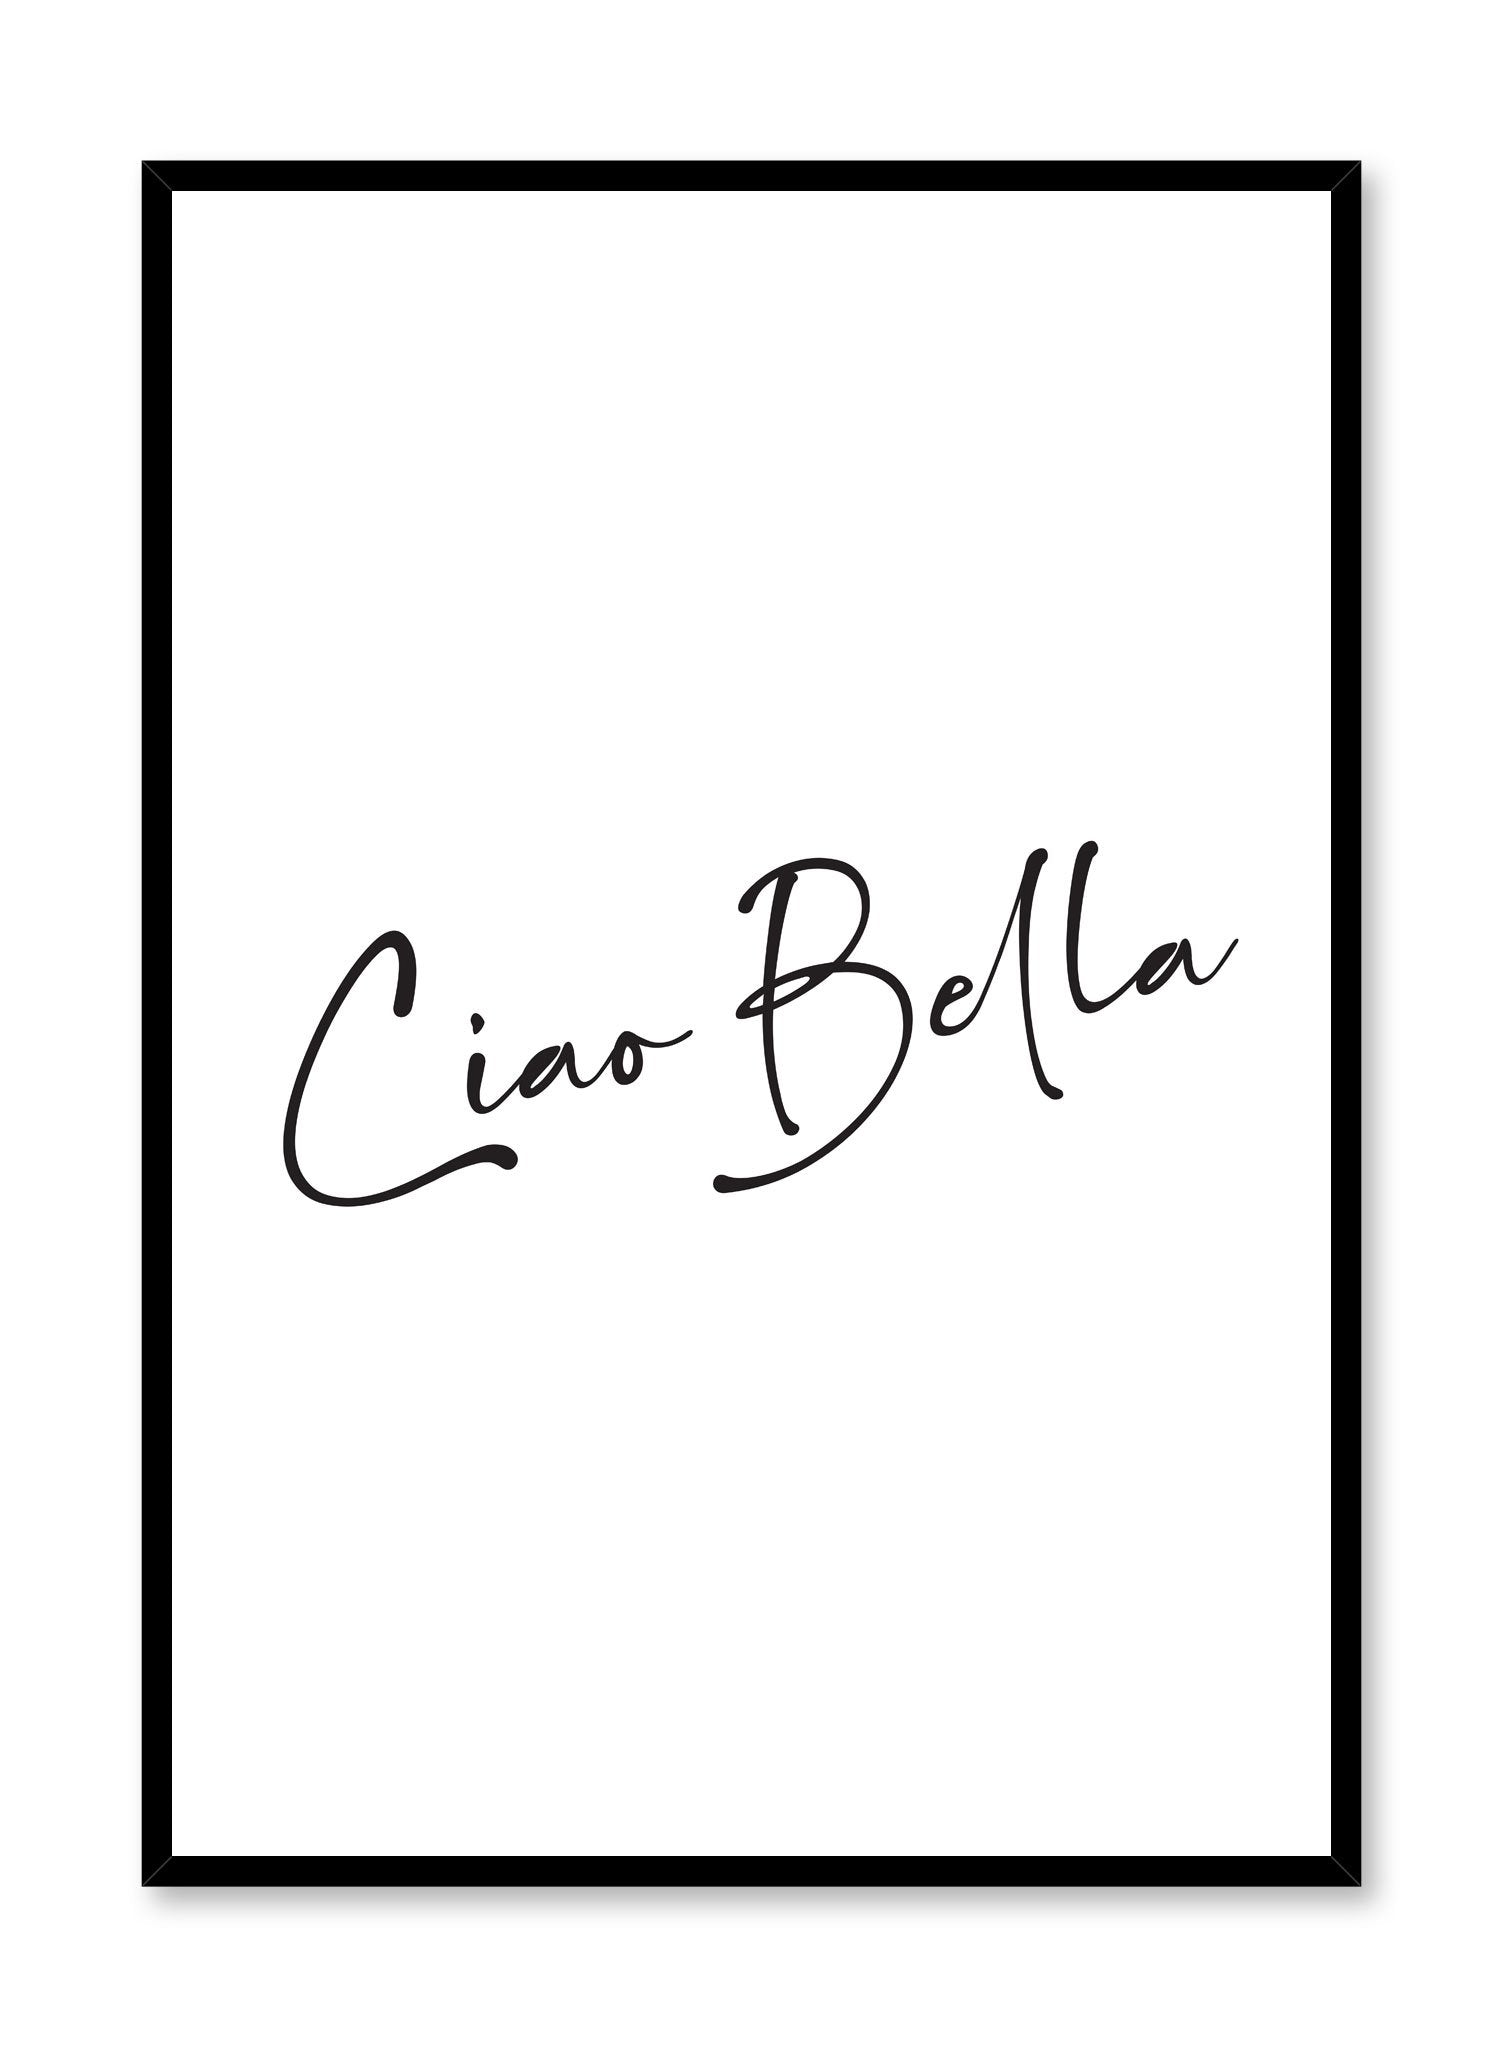 Ciao Bella modern minimalist typography art print by Opposite Wall